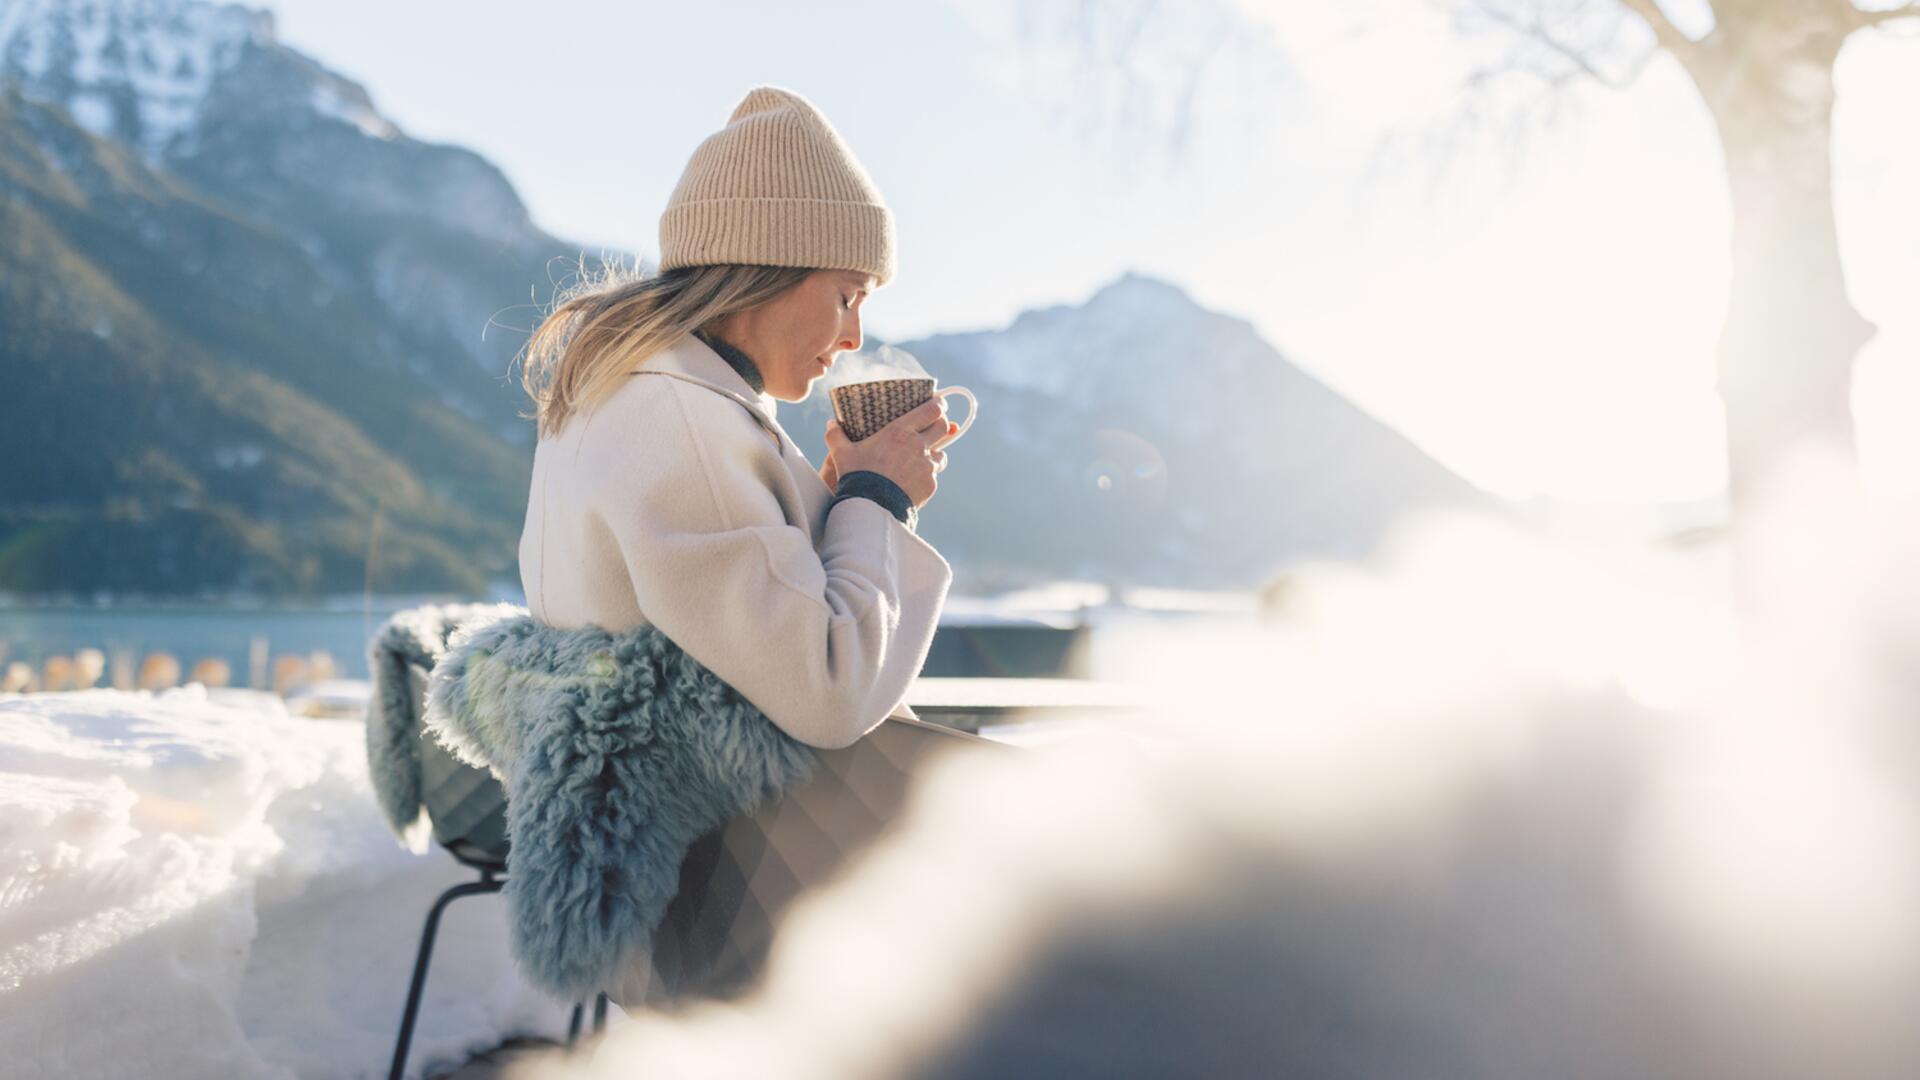 drinking coffee by the lake in winter